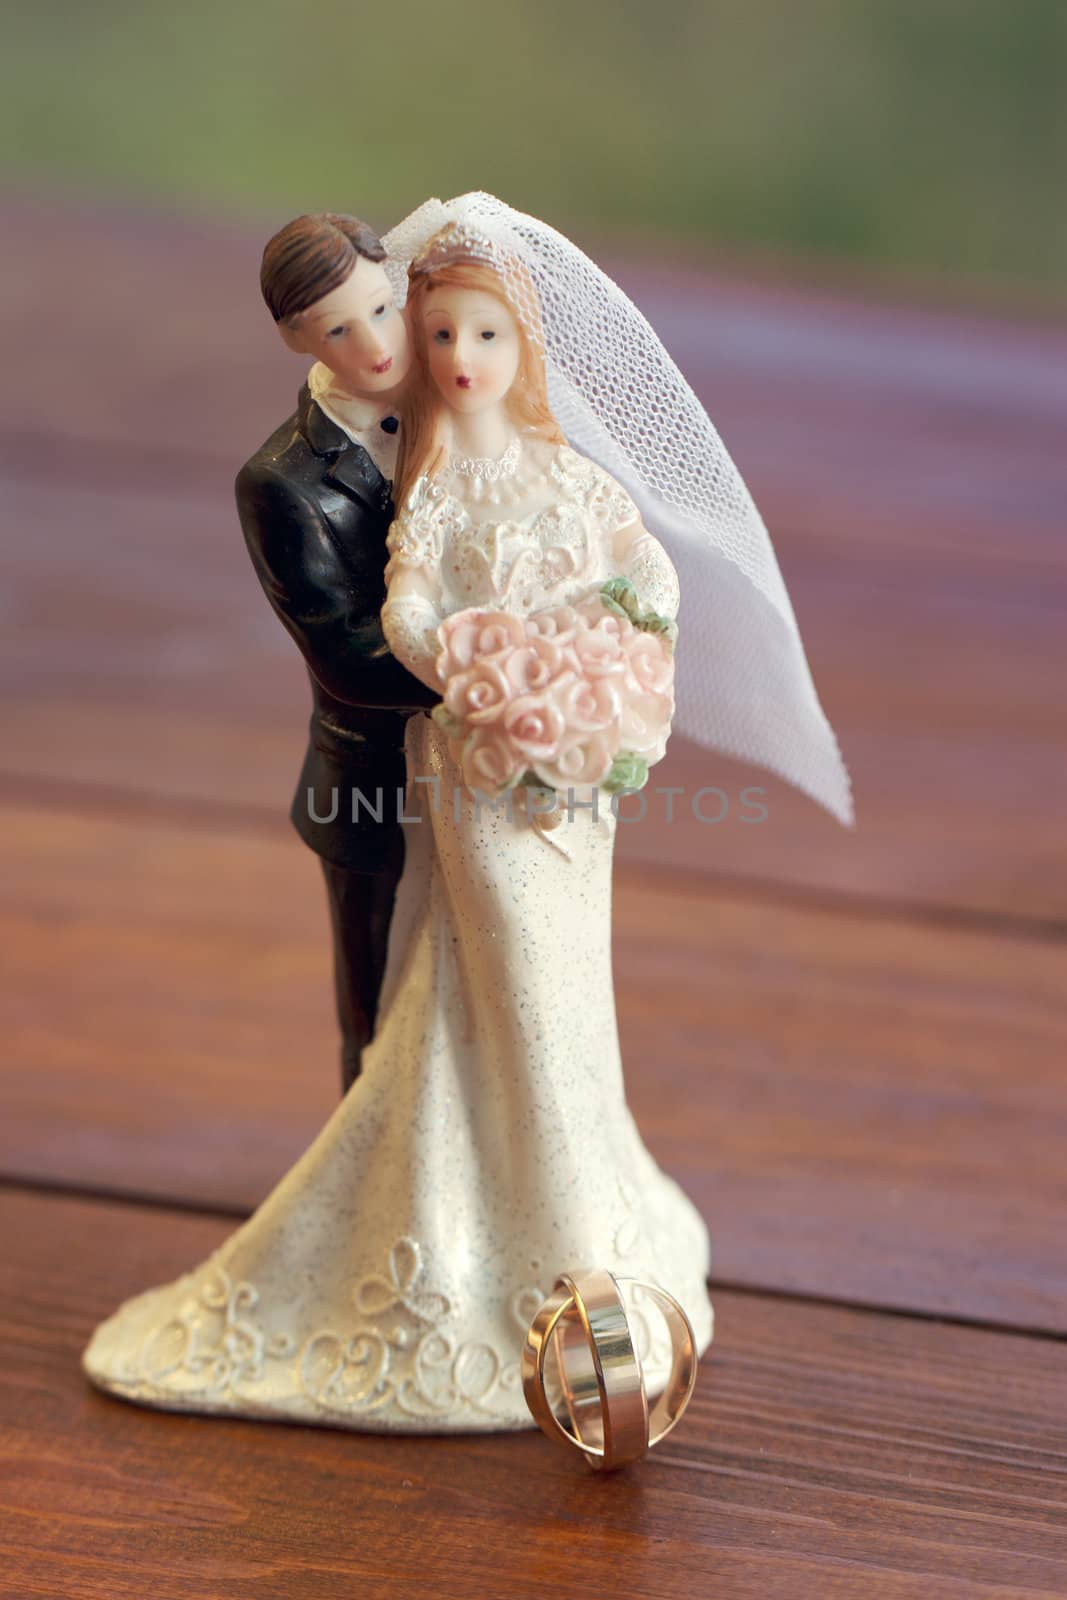 Bride and groom figurines on the boards